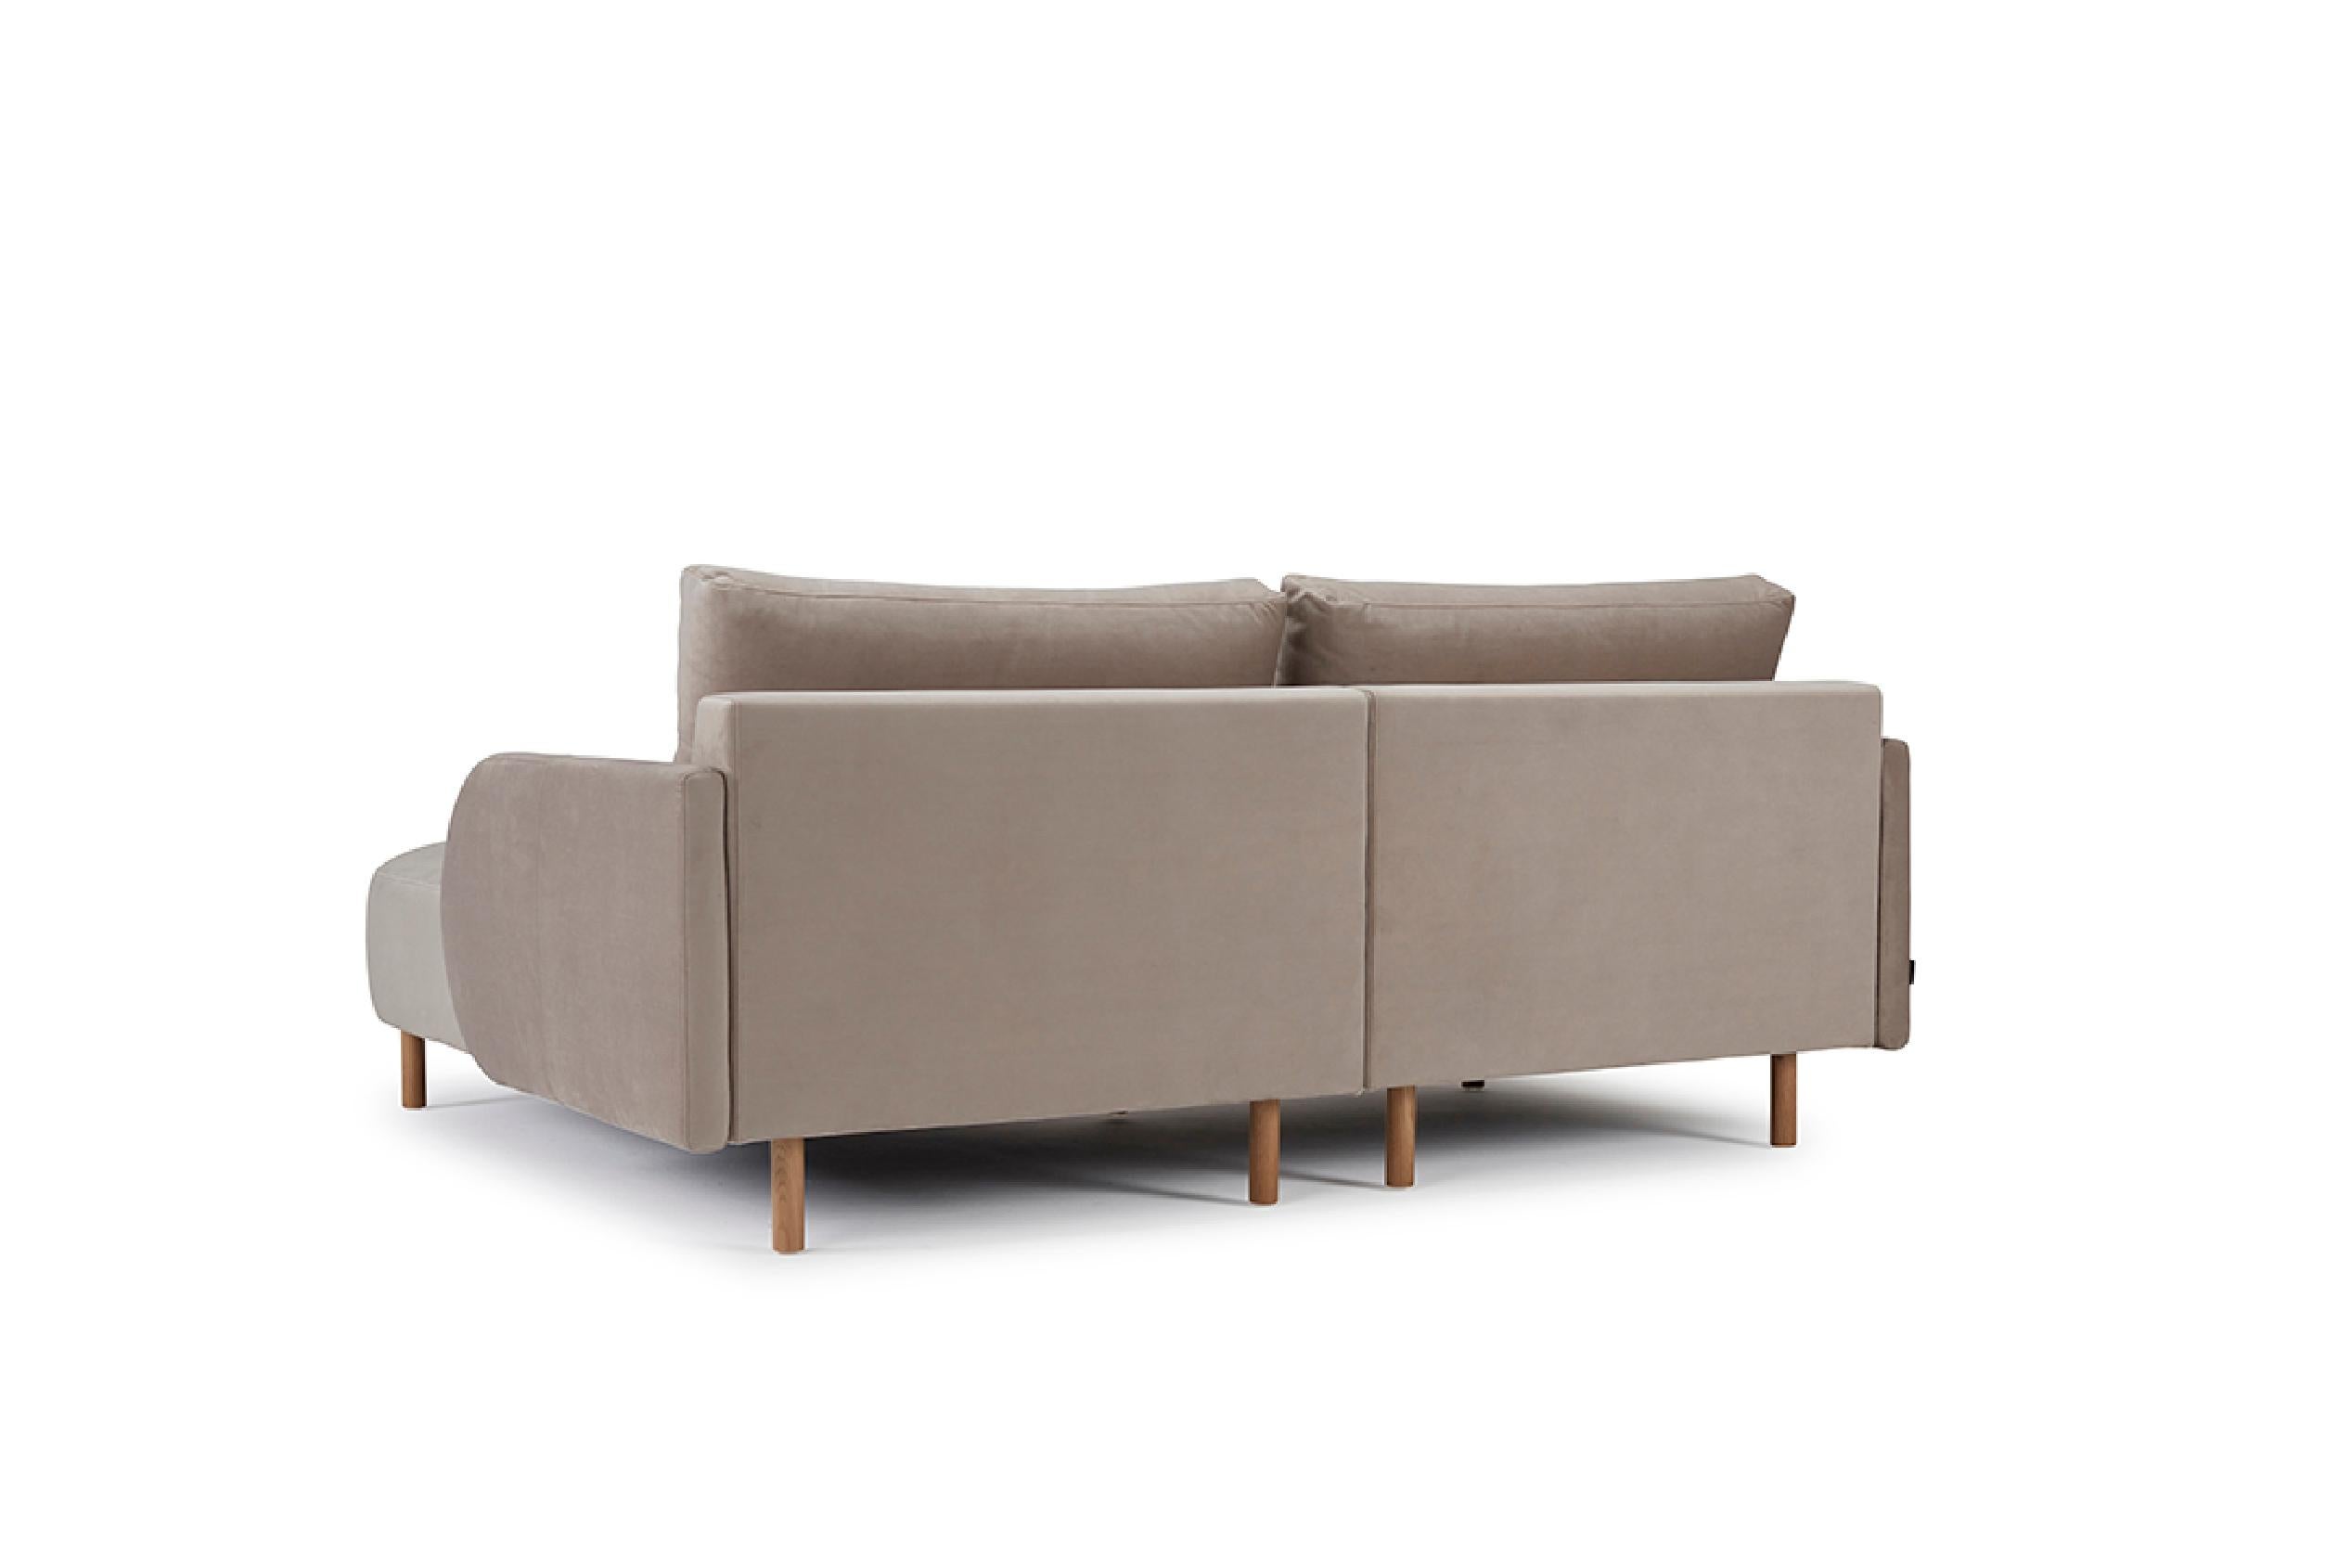 Embodying contemporary design aesthetics, the Paleta Chaise+1 Sofa combines clean lines and gentle forms. As an OEM product, it offers black metal or oak lacquered legs along with a wide selection of fabric or wool finishes for the upholstery,